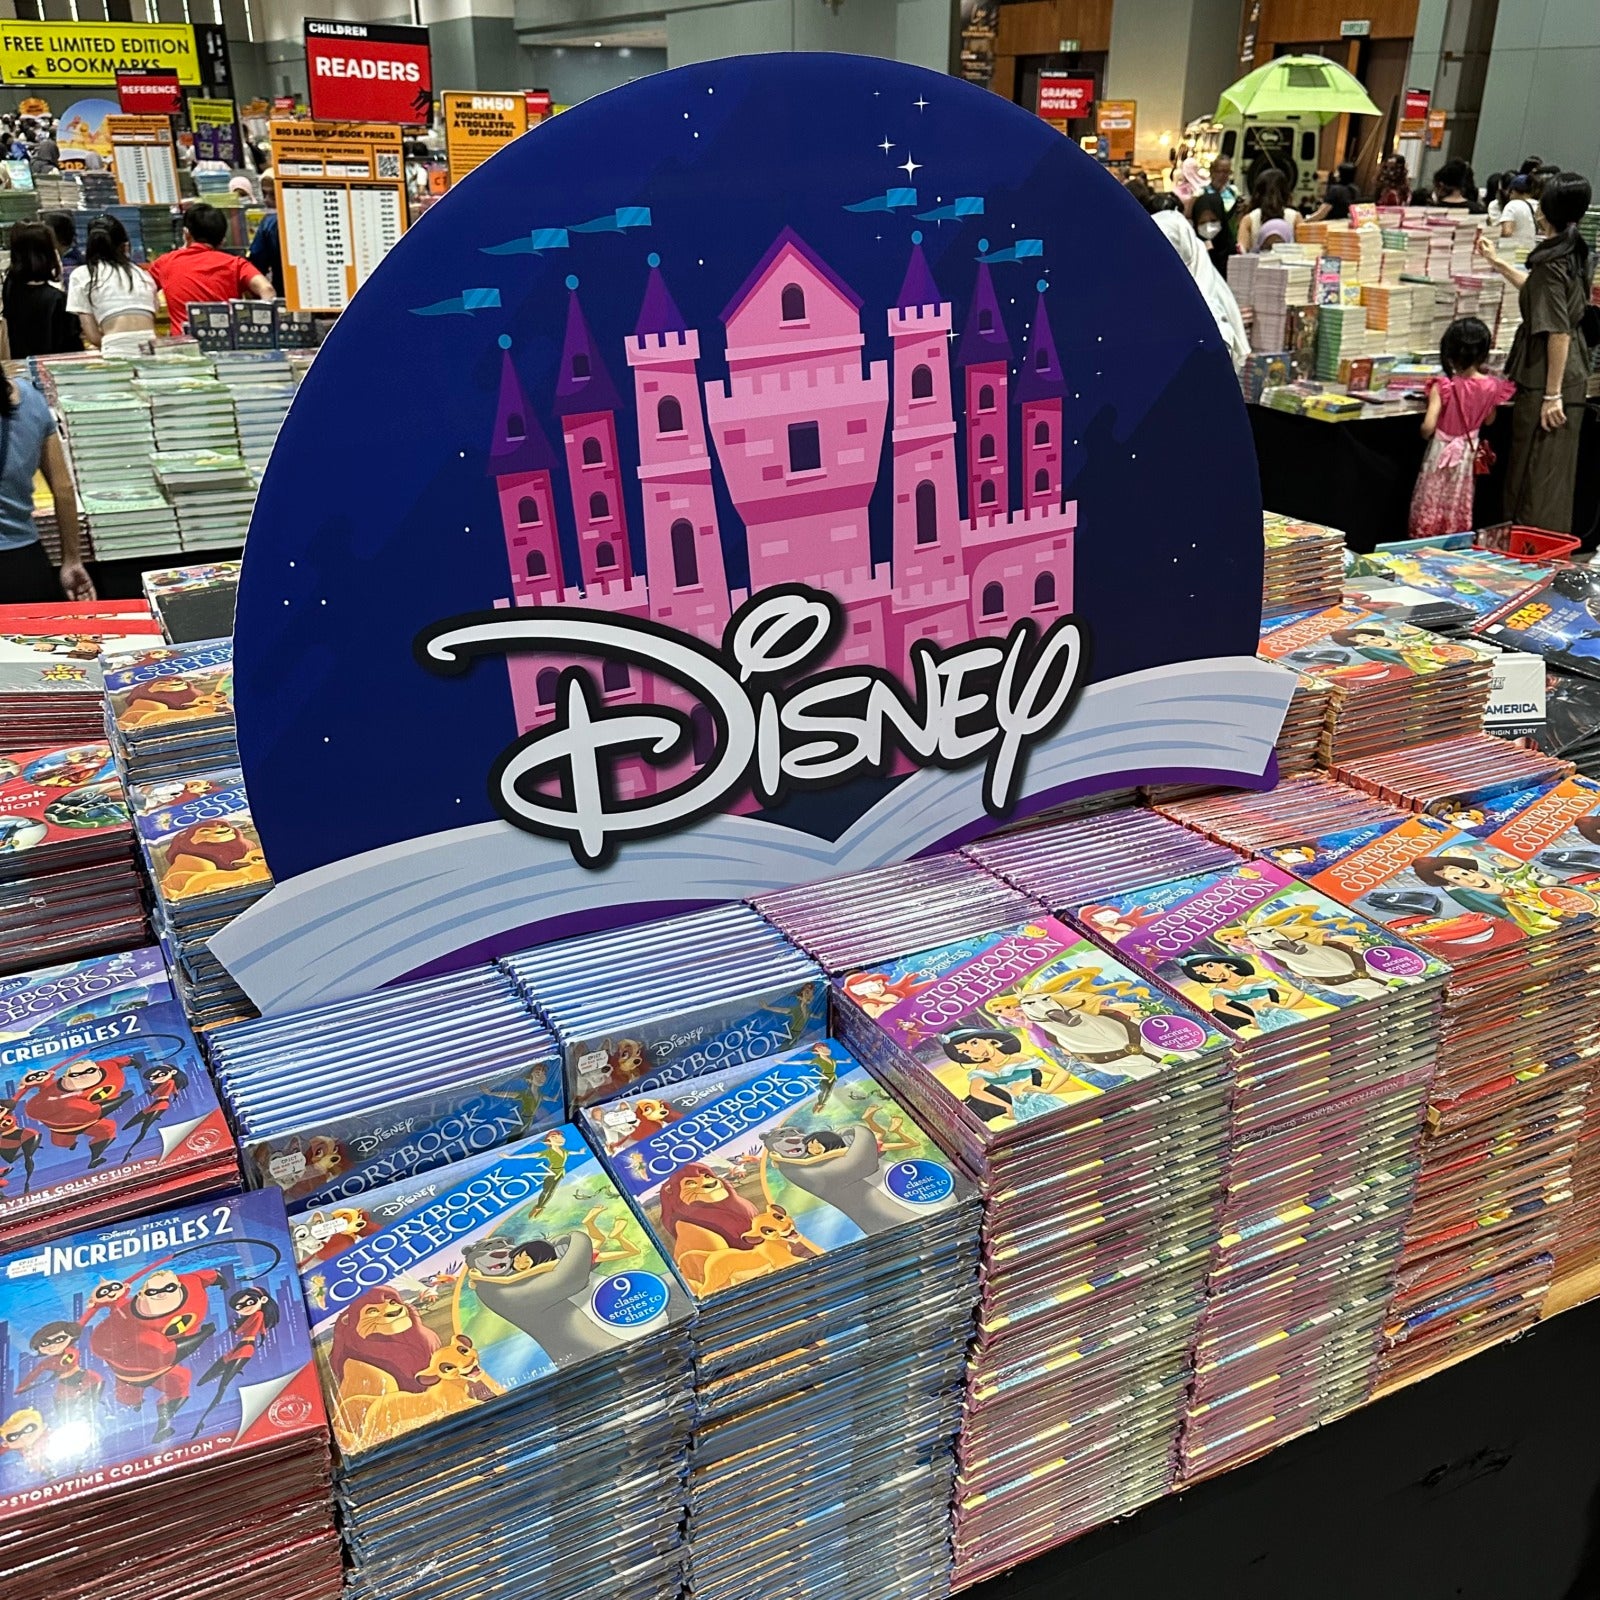 Children can find their favourite Disney series ranging from story books to activity books at the Book Sale